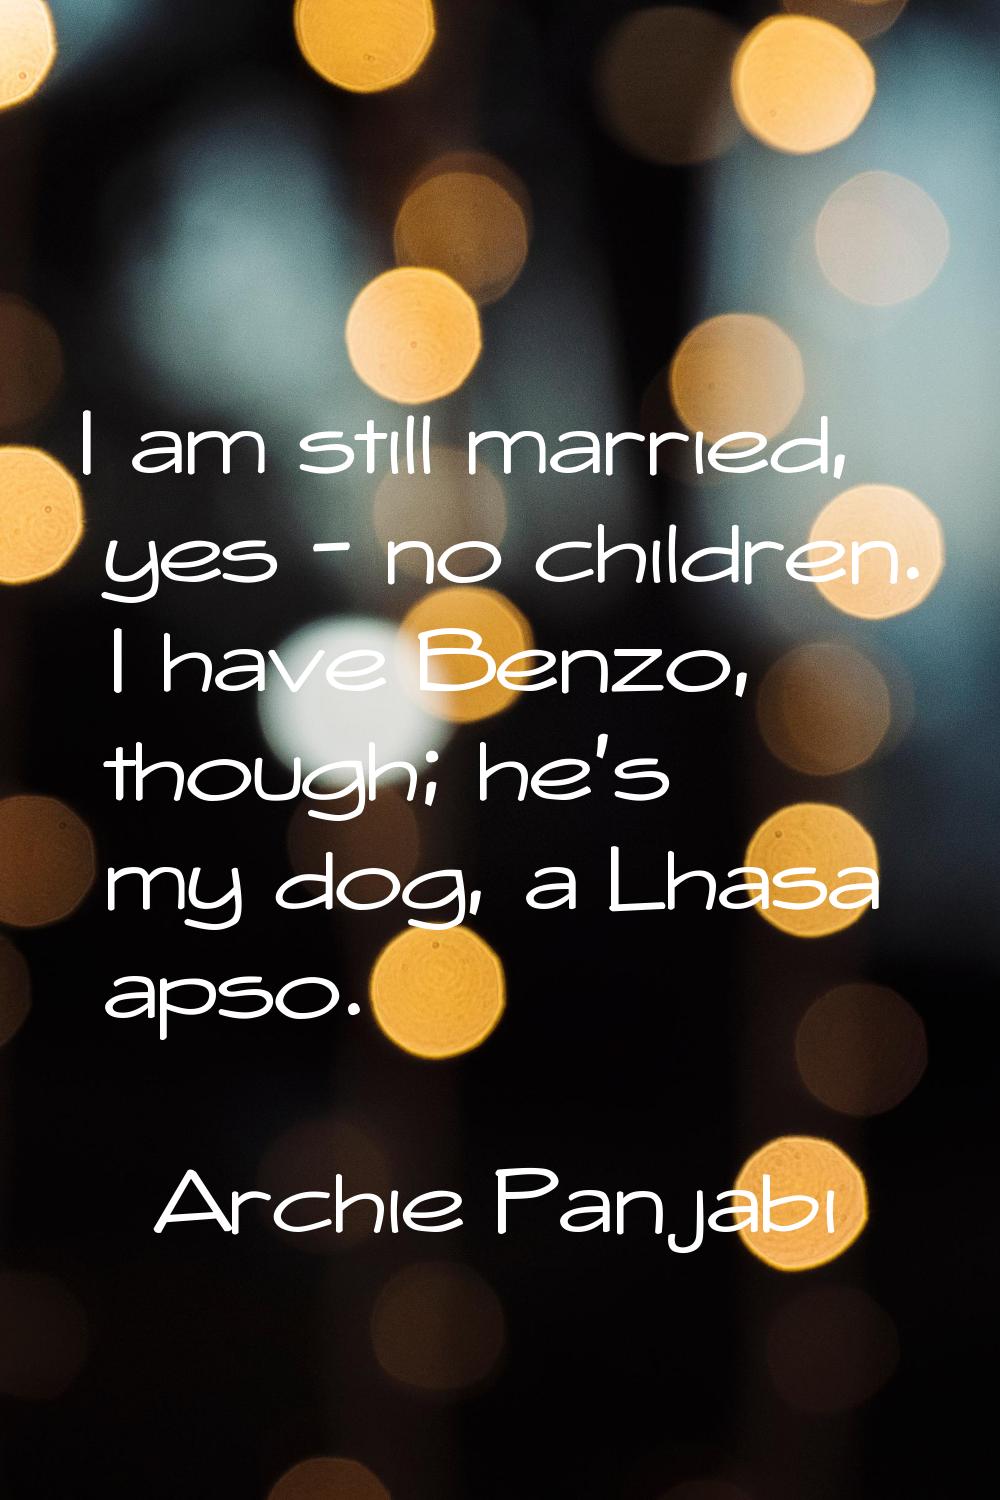 I am still married, yes - no children. I have Benzo, though; he's my dog, a Lhasa apso.